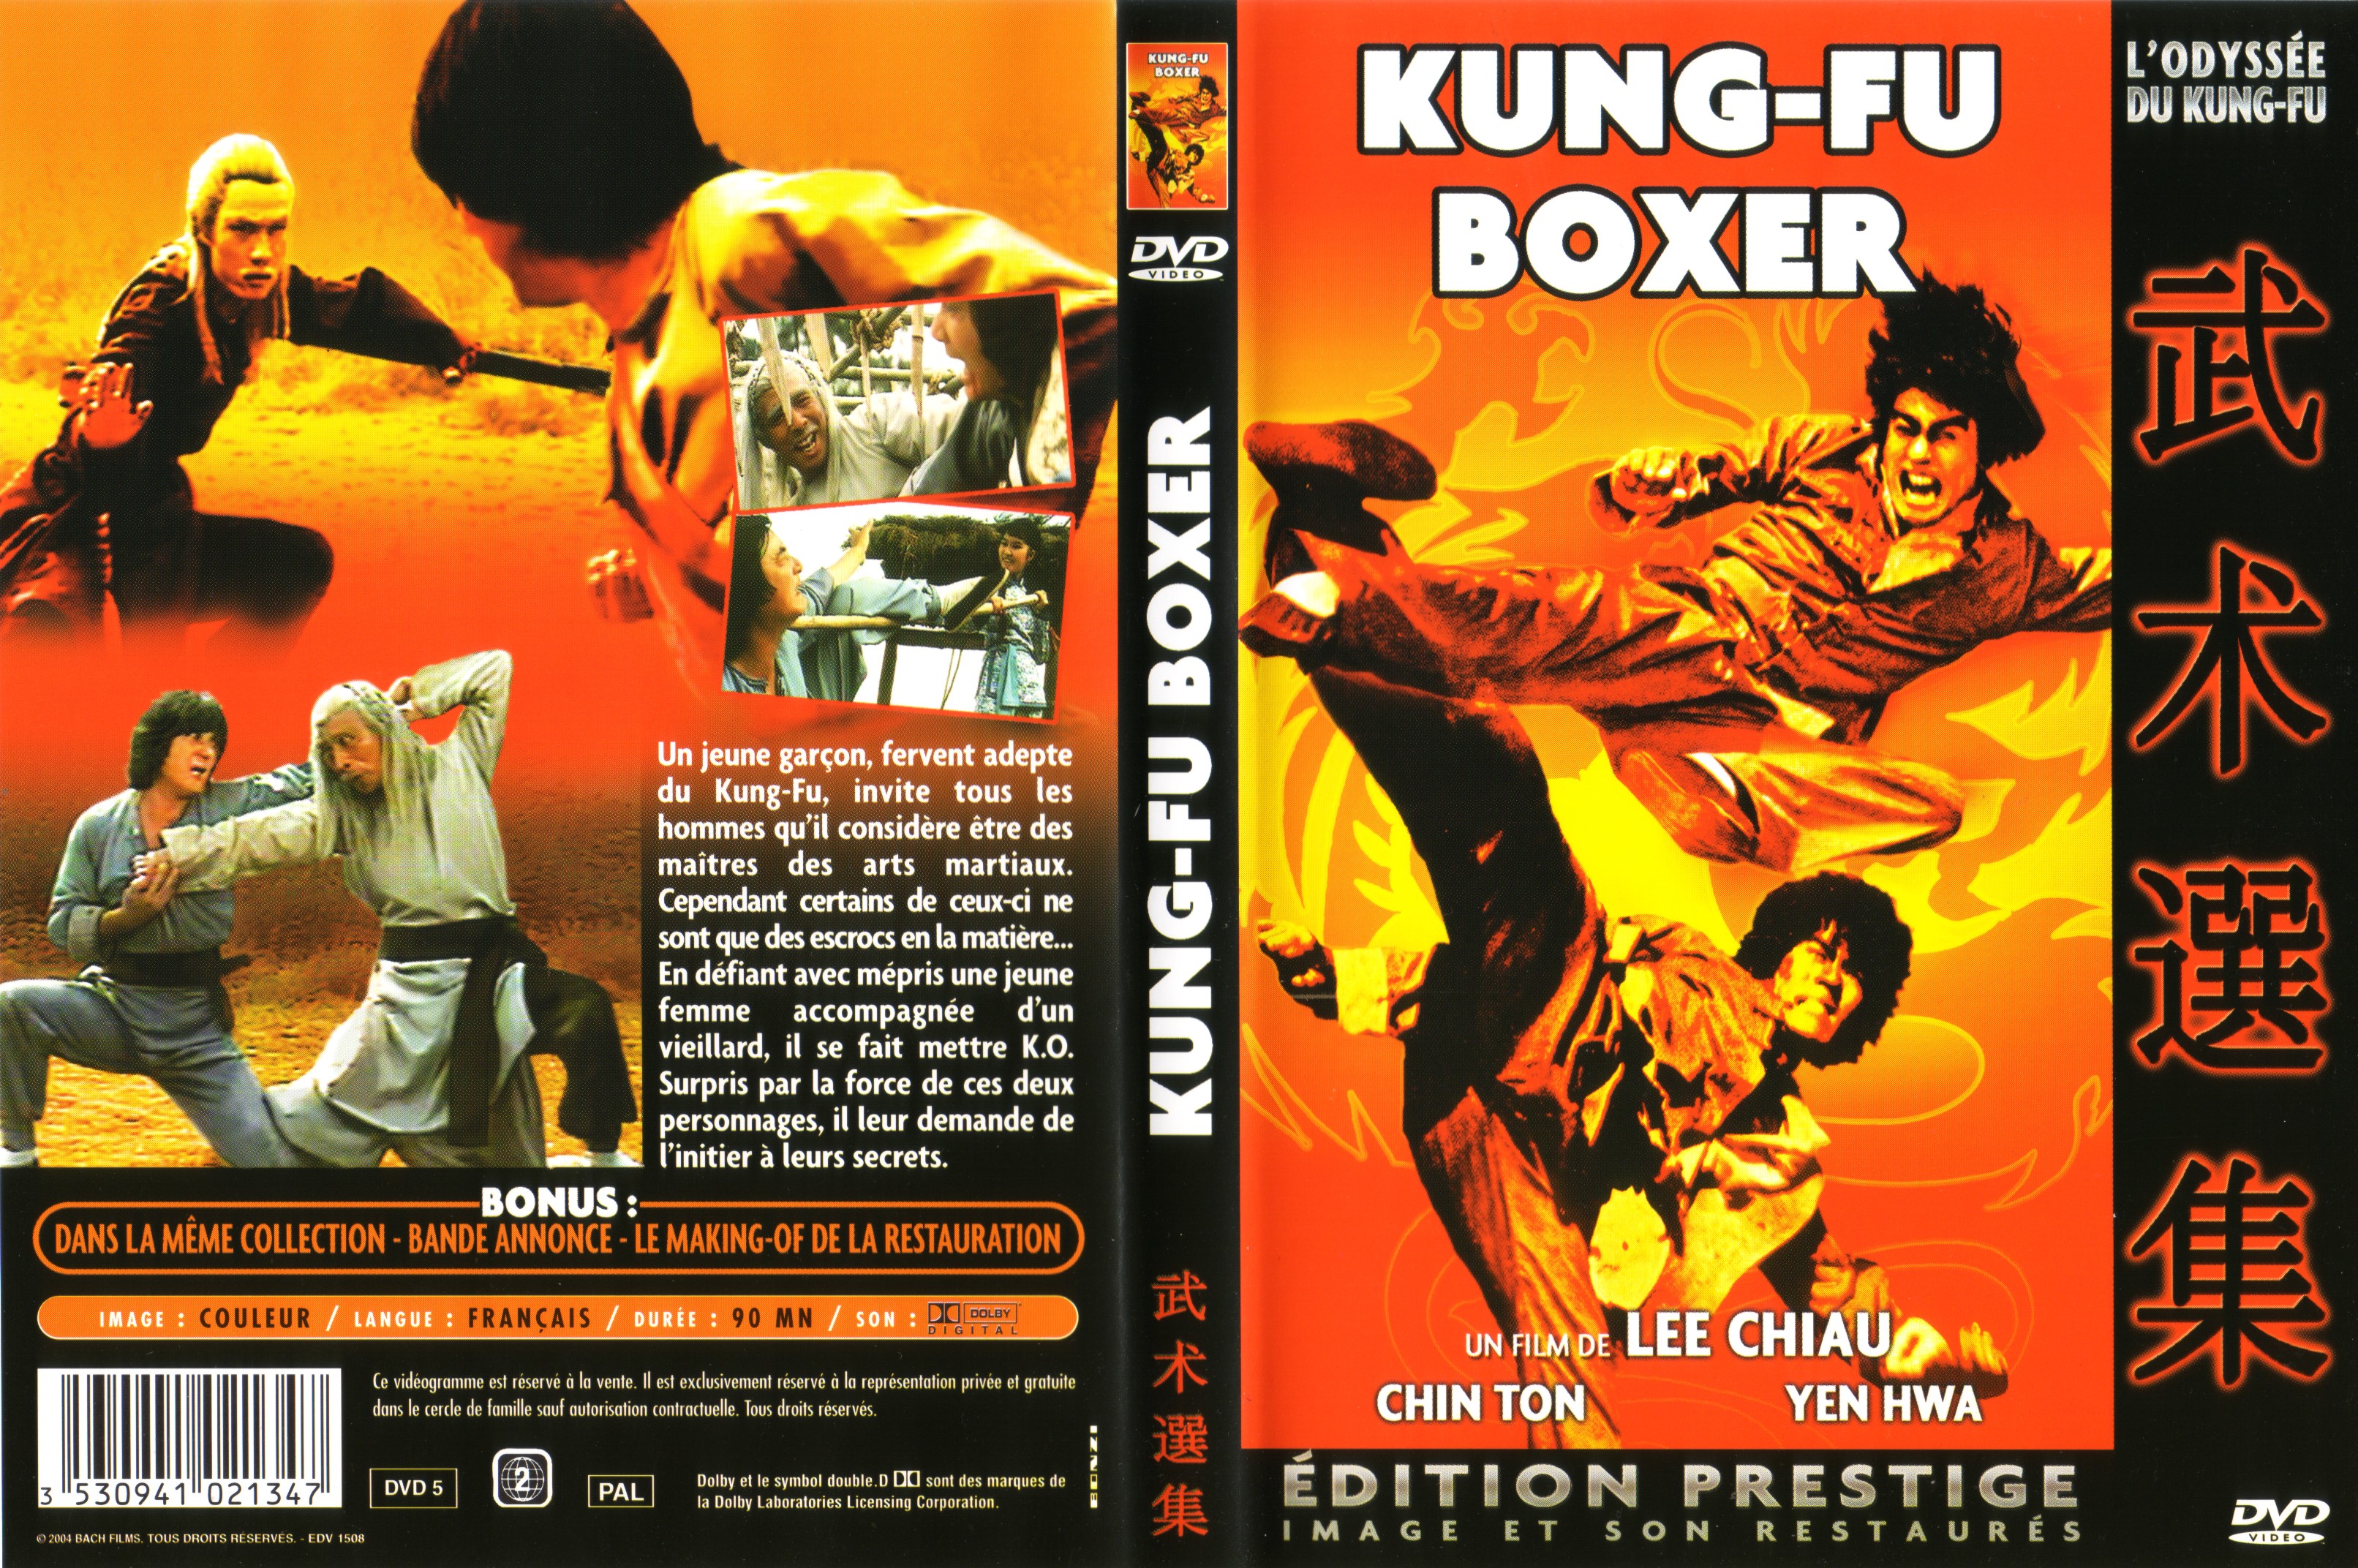 Jaquette DVD Kung-fu boxer